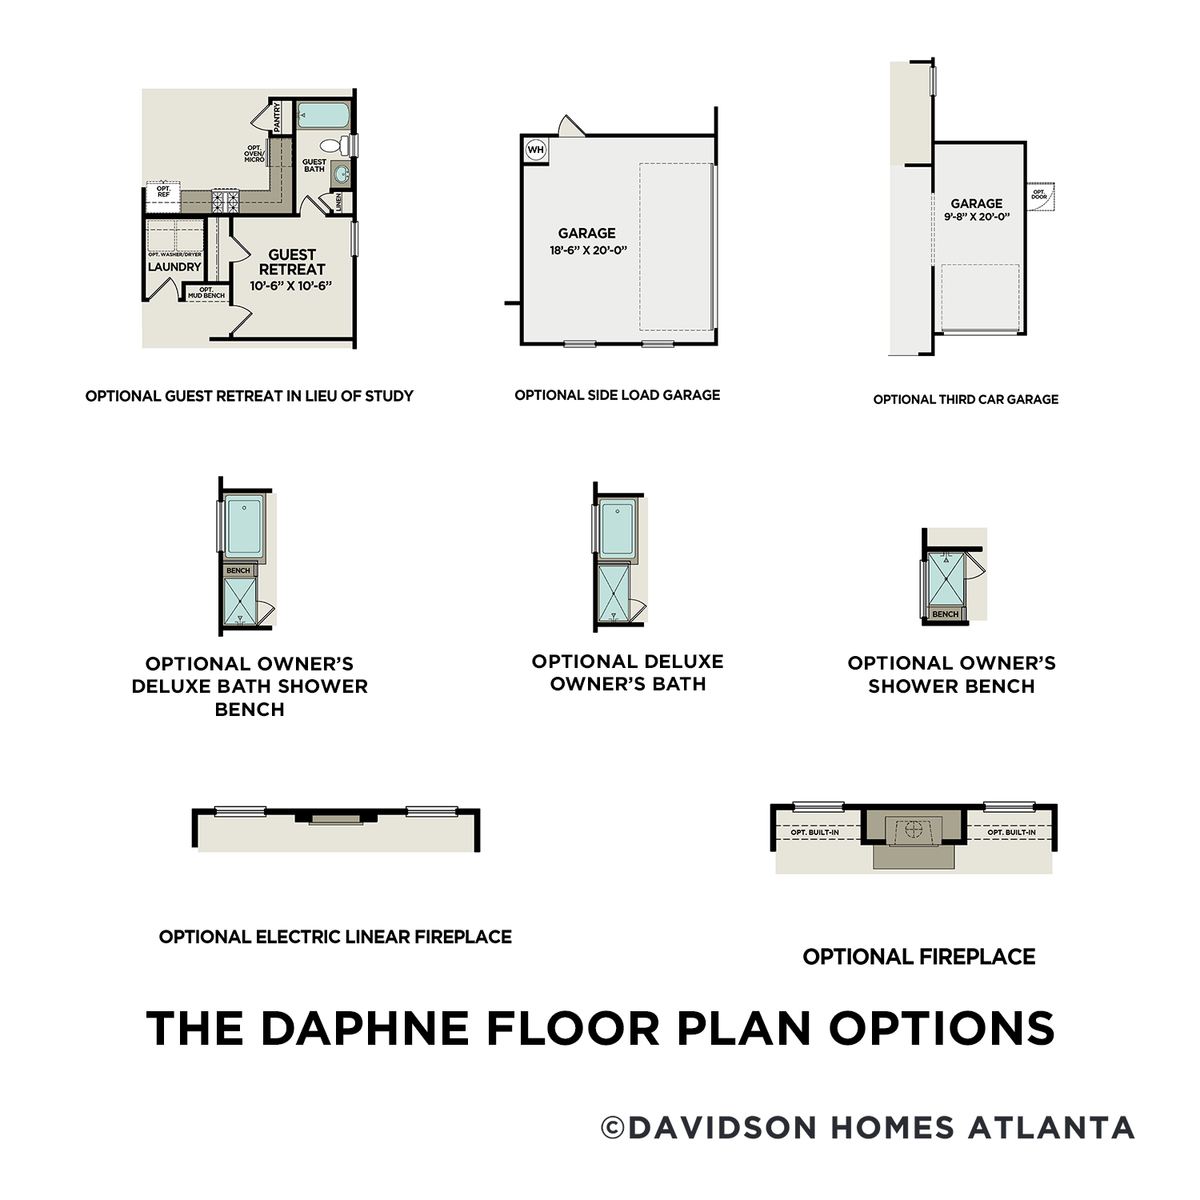 2 - The Daphne A buildable floor plan layout in Davidson Homes' Riverwood community.